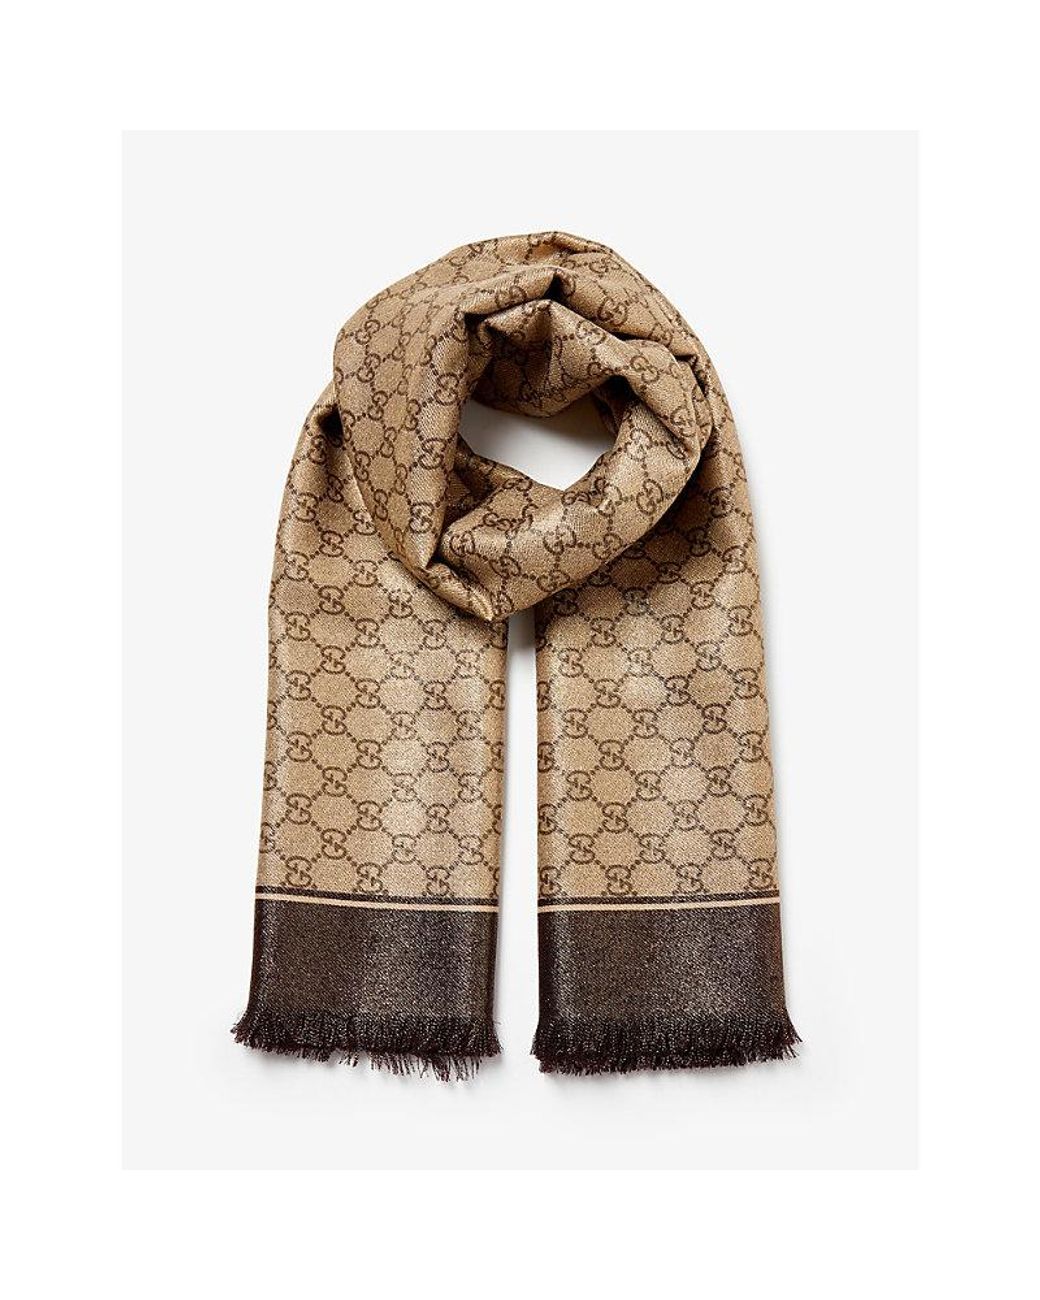 Gucci Rainy Brand-print Wool Scarf in Brown